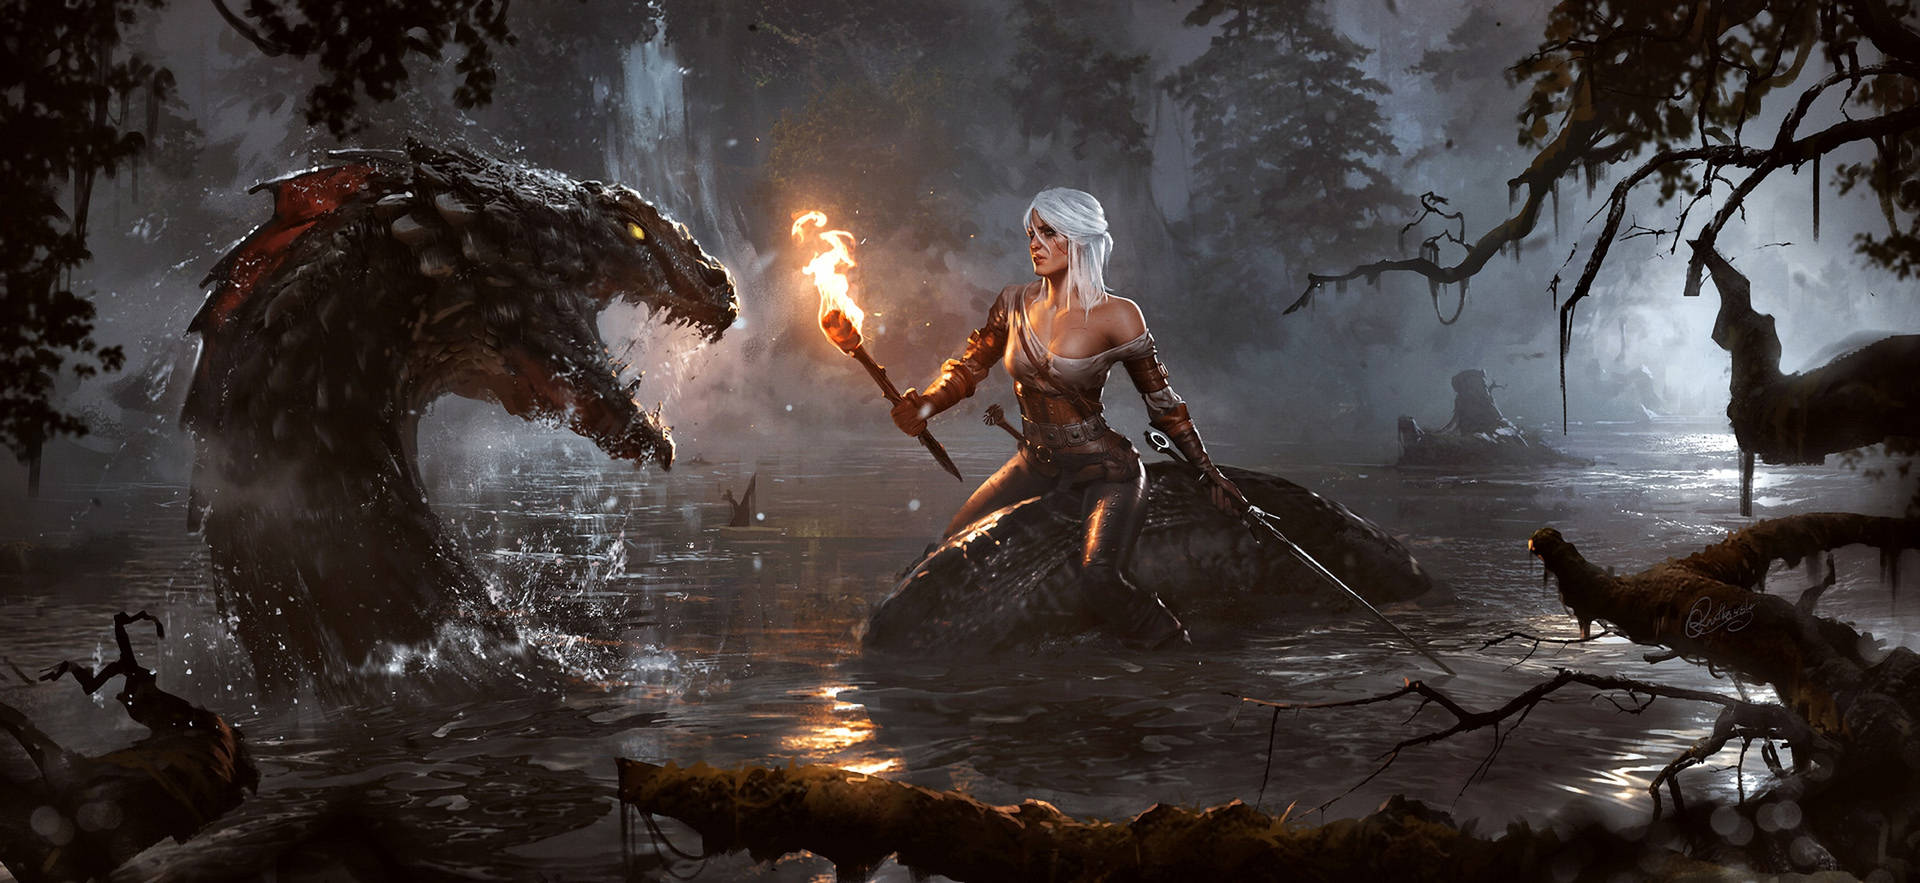 "Ciri engaged in an epic battle against the Great Serpent in The Witcher 3" Wallpaper